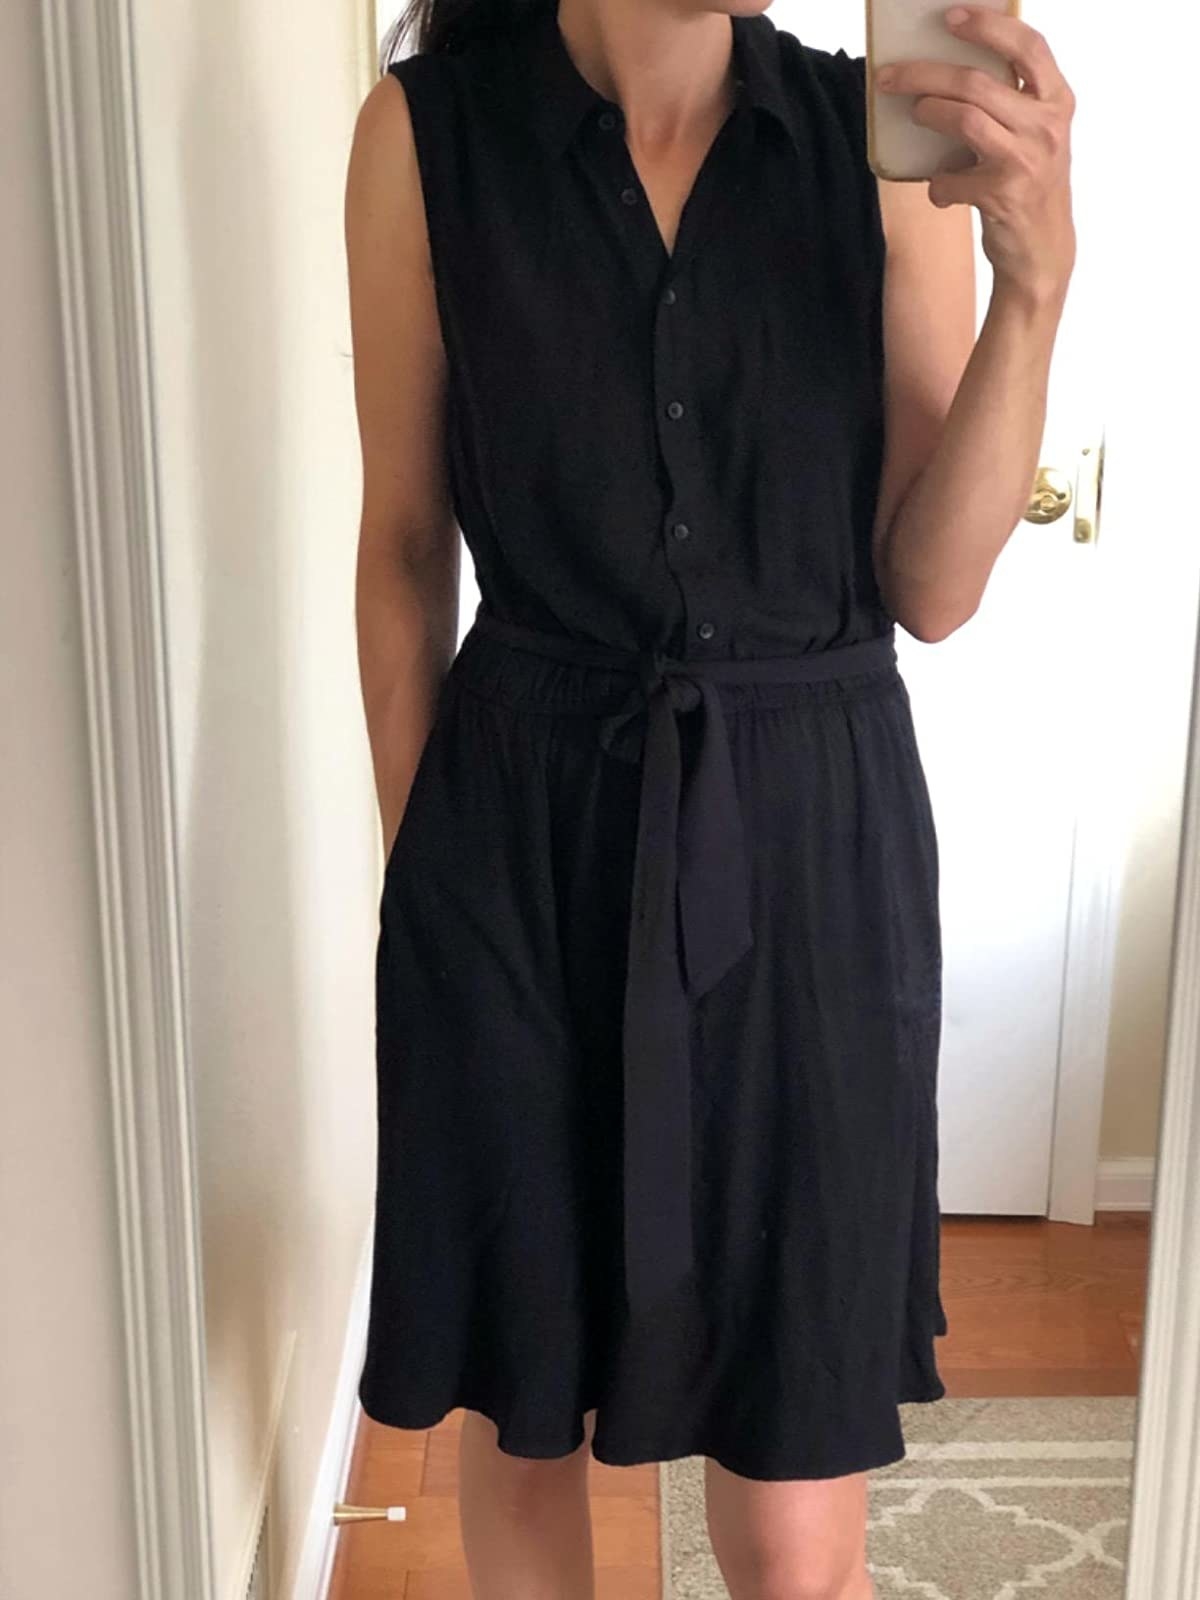 reviewer wearing the black tie-waist dress with button-front top half and collar neckline